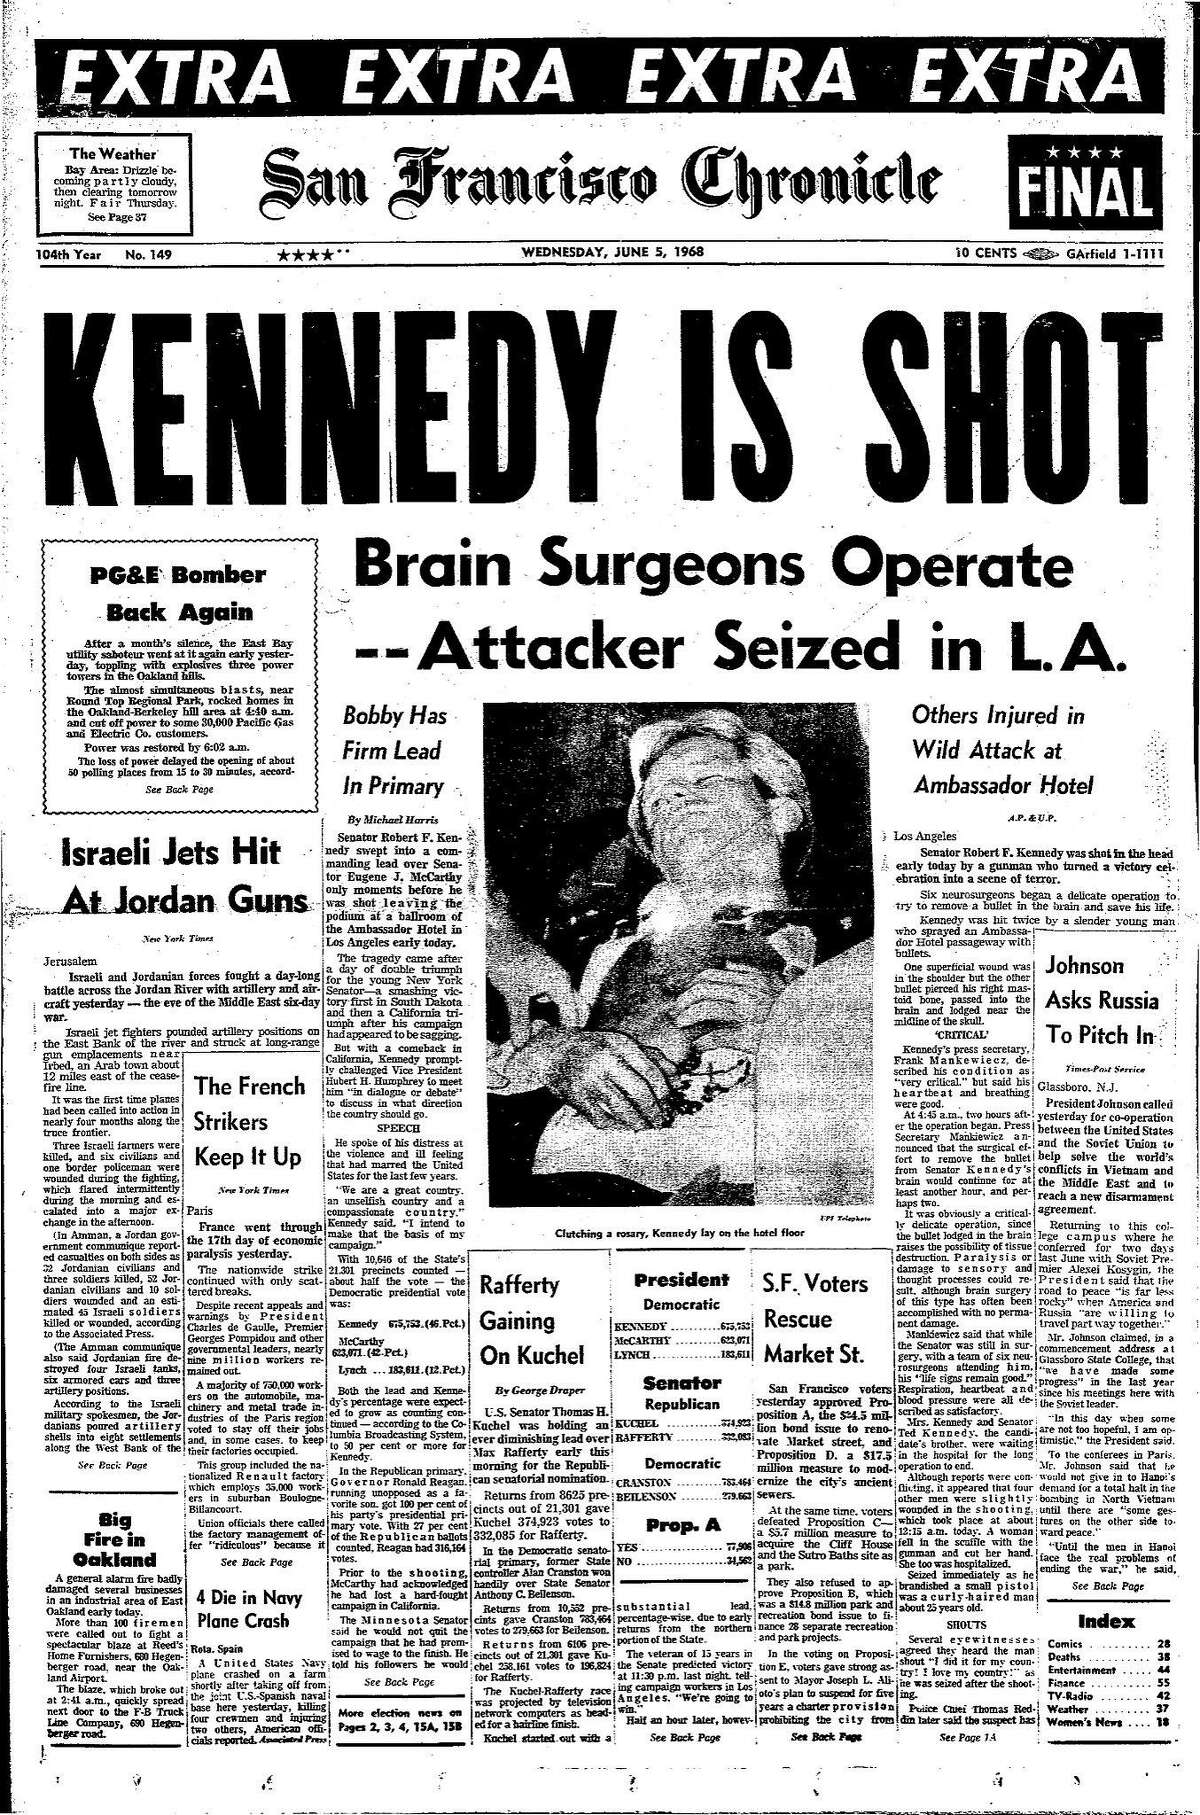 Historic Chronicle Front Page June 5, 1968 Robert F. Kennedy is shot by Sirhan Sirhan Chron365, Chroncover